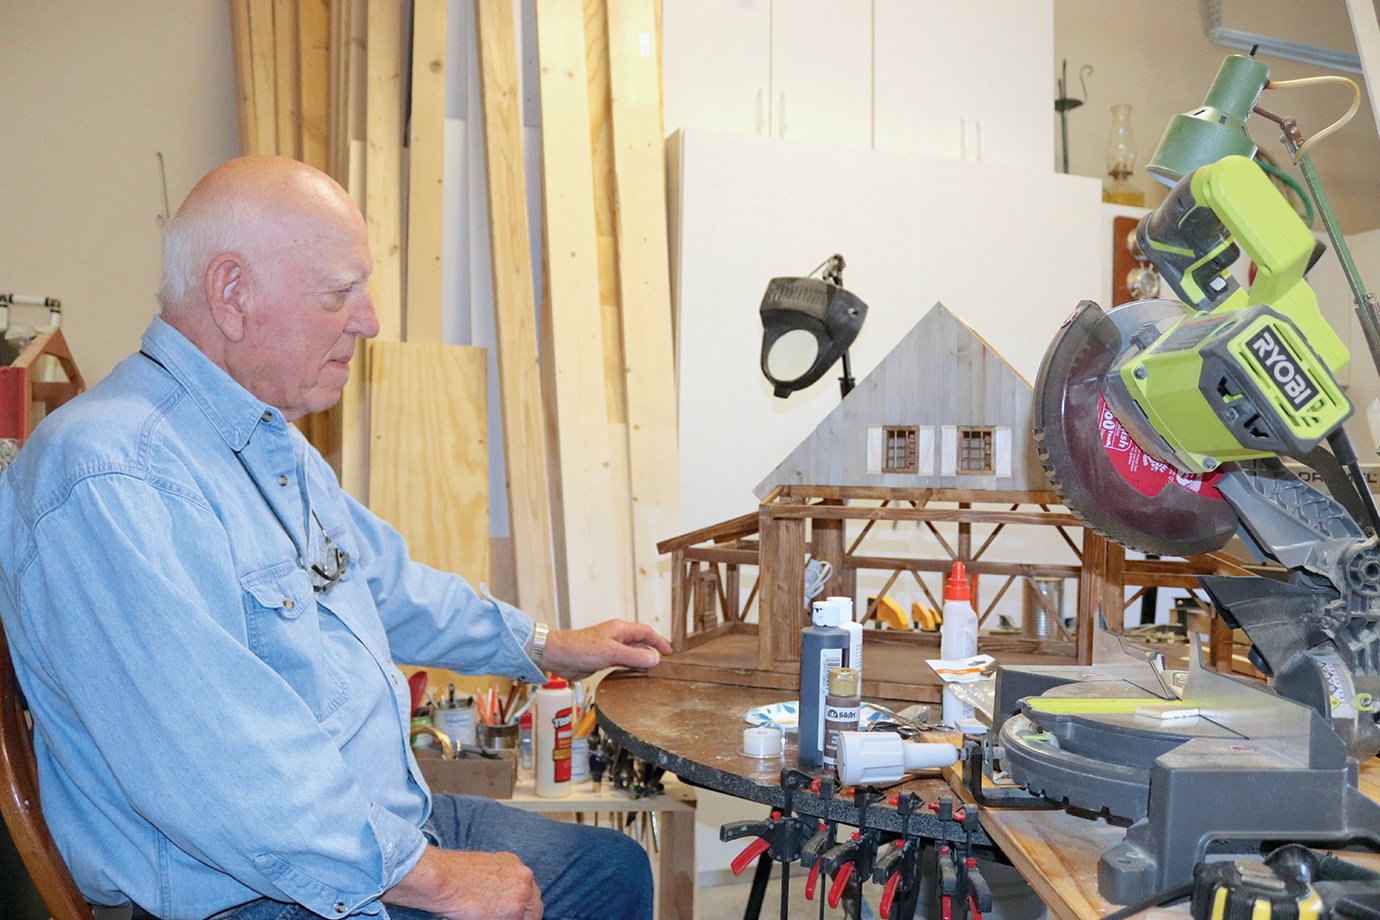 Richard Peterman sits in his home workshop Wednesday to show what it's like to build his renowned Santa Houses each year for the holiday season.